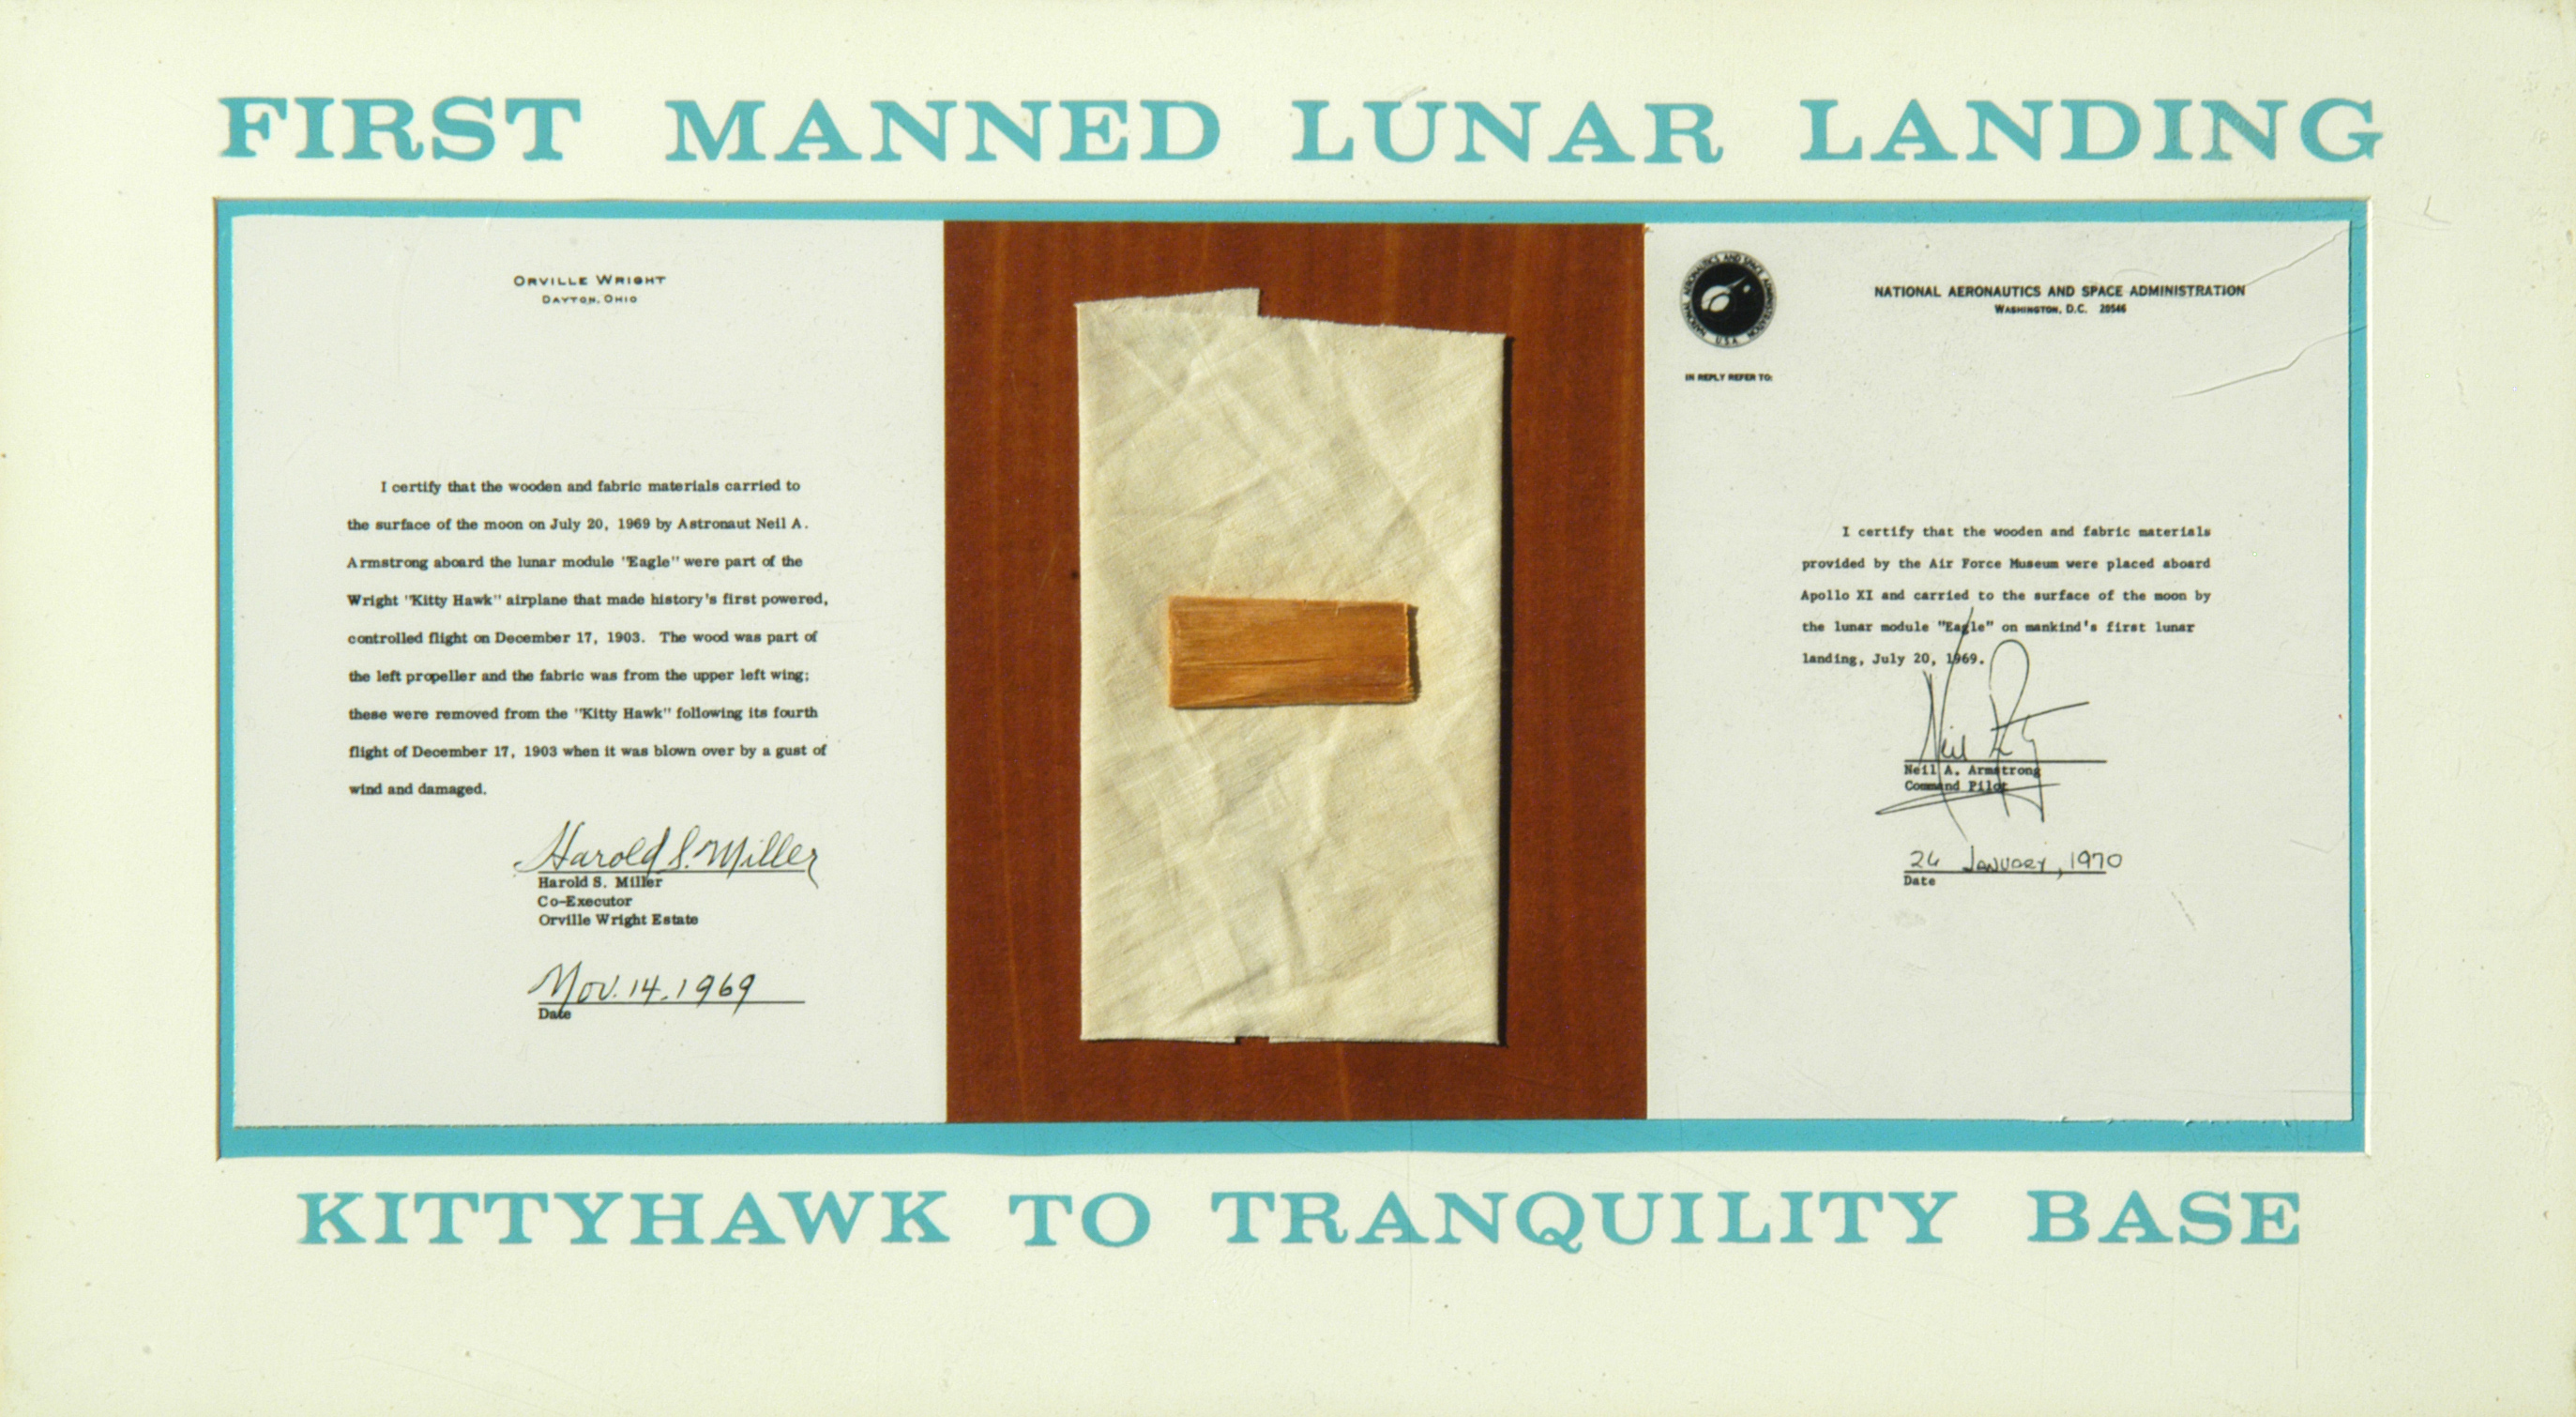 Display of the wood and fabric pieces of the Wright Flyer that Apollo 11 astronaut Neil A. Armstrong took to the Moon.